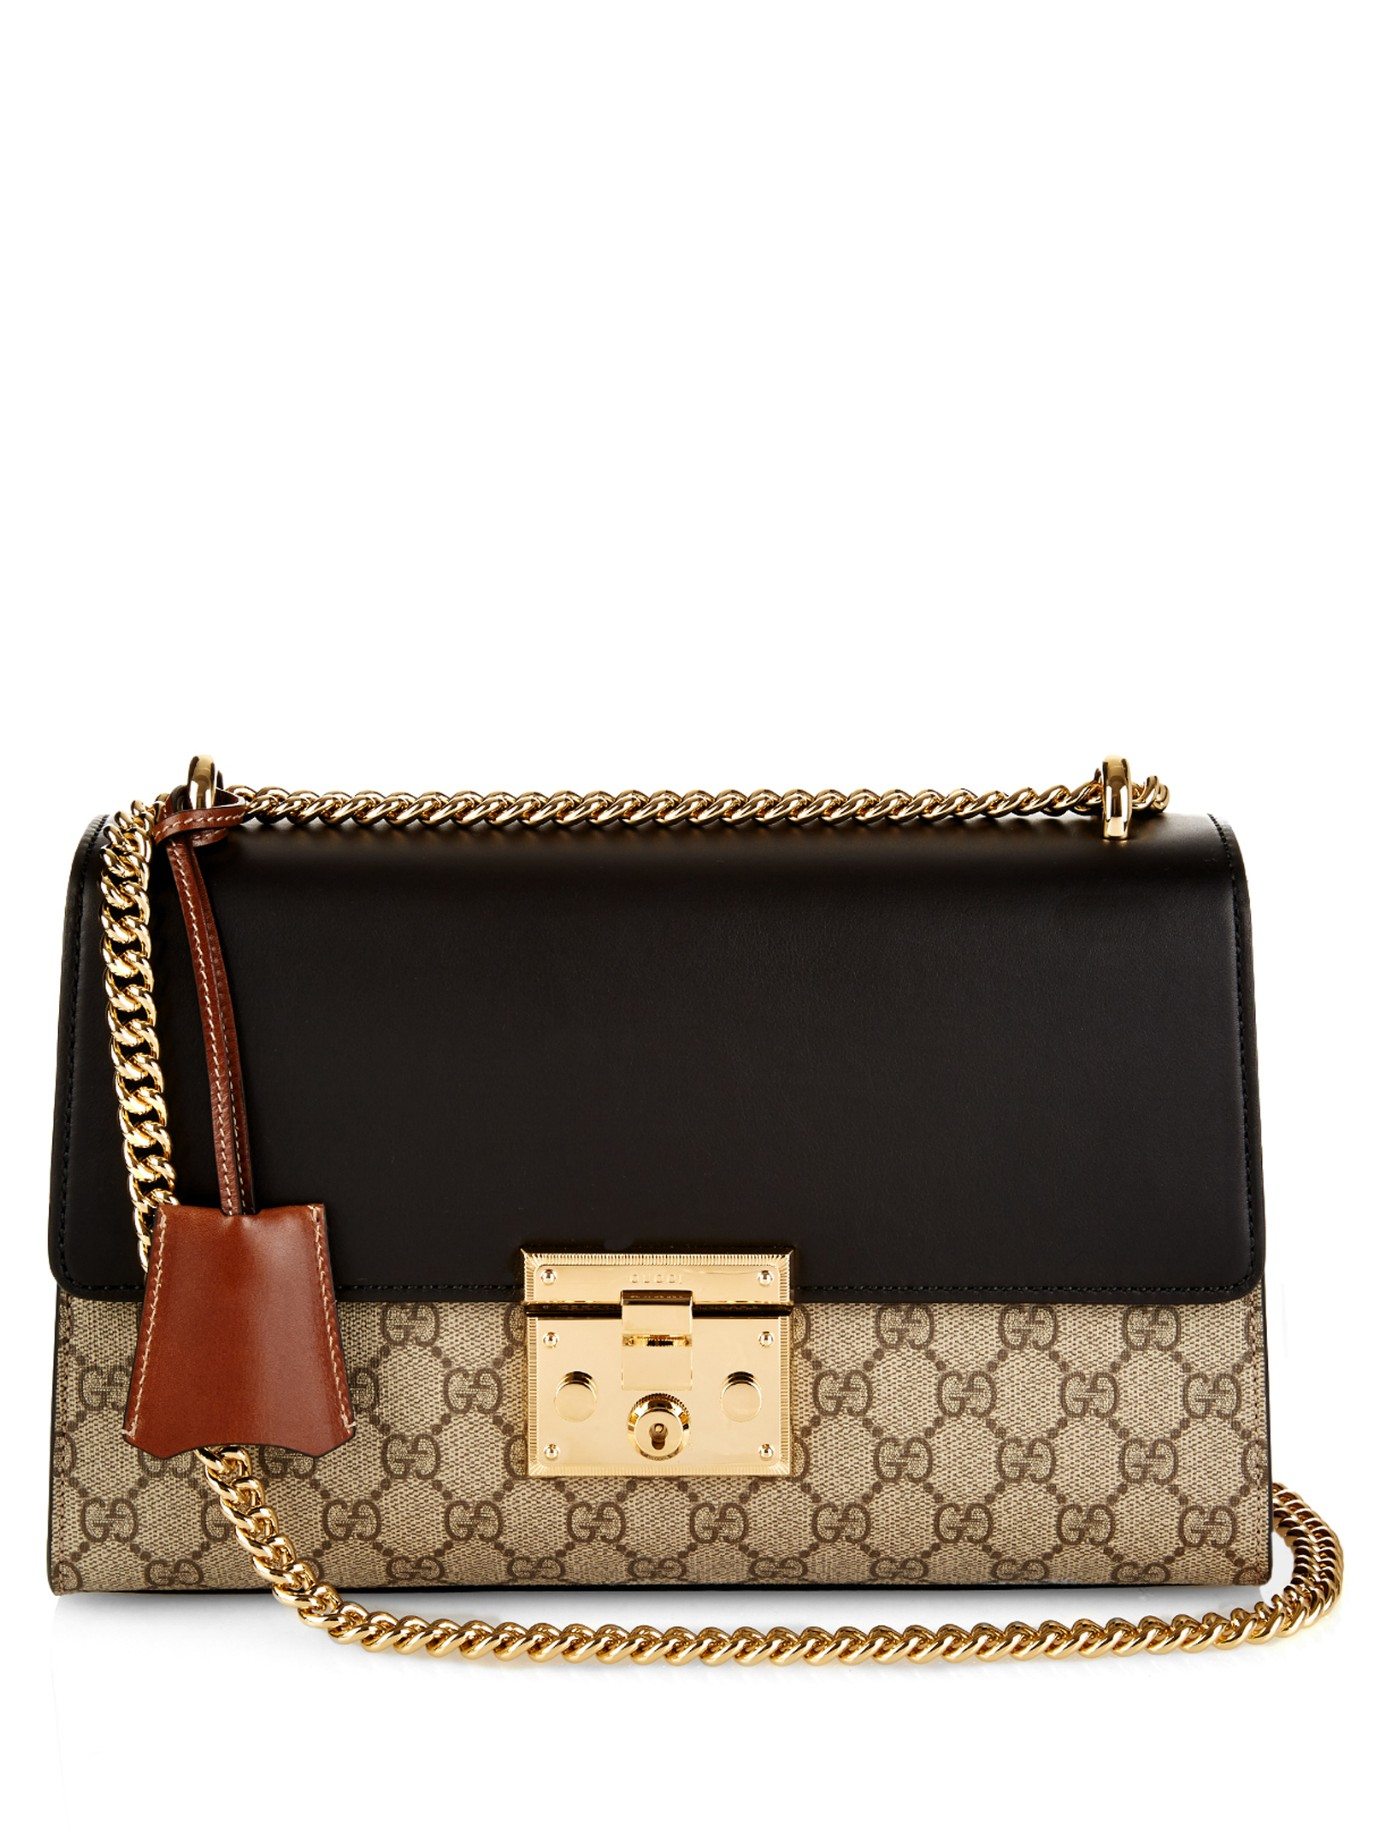 Lyst - Gucci Padlock Leather And Canvas Shoulder Bag in Black